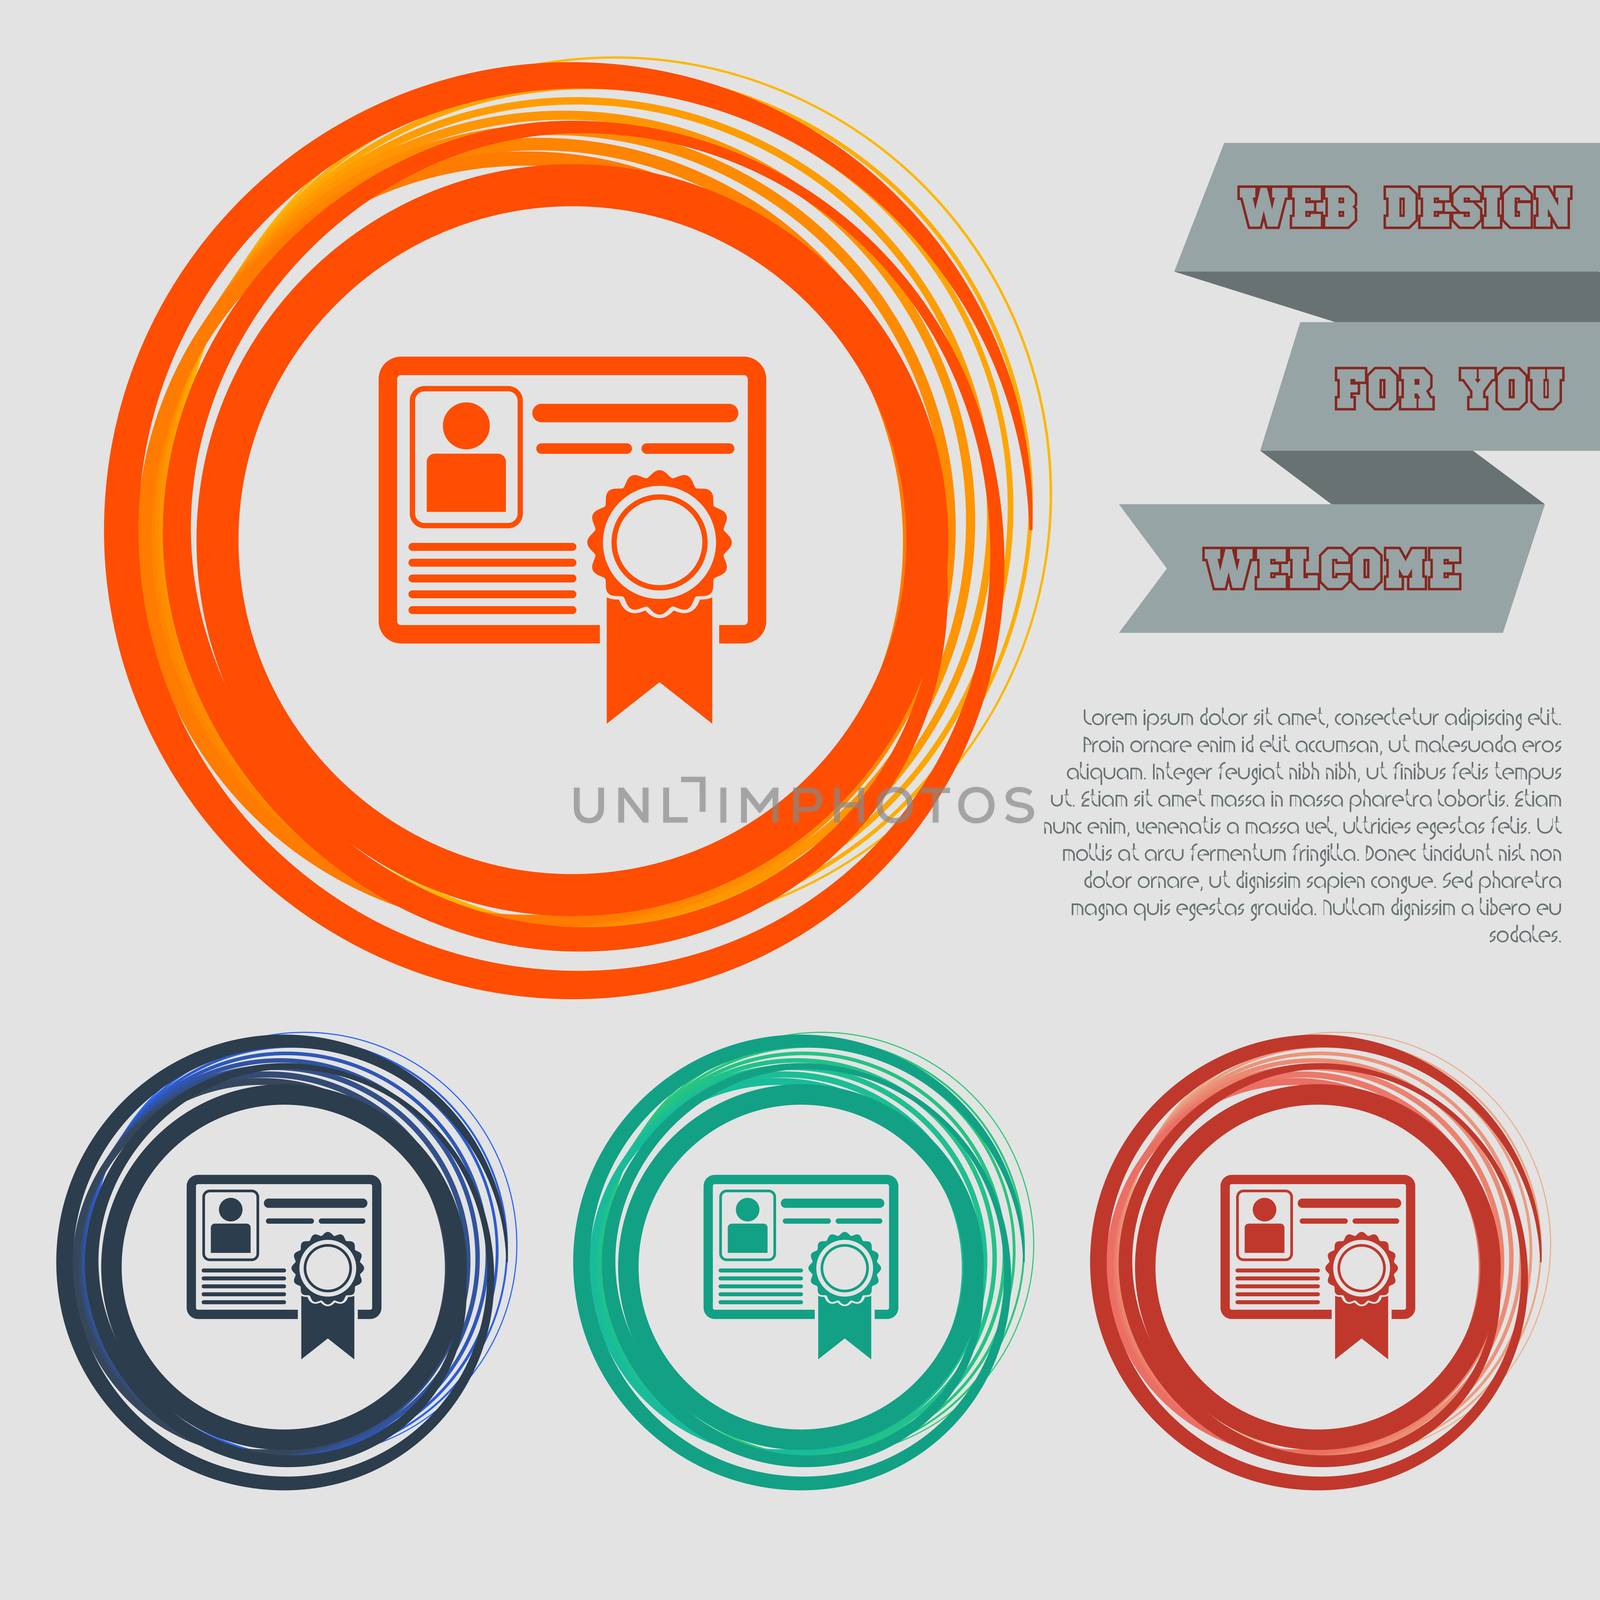 certificate icon on the red, blue, green, orange buttons for your website and design with space text. illustration